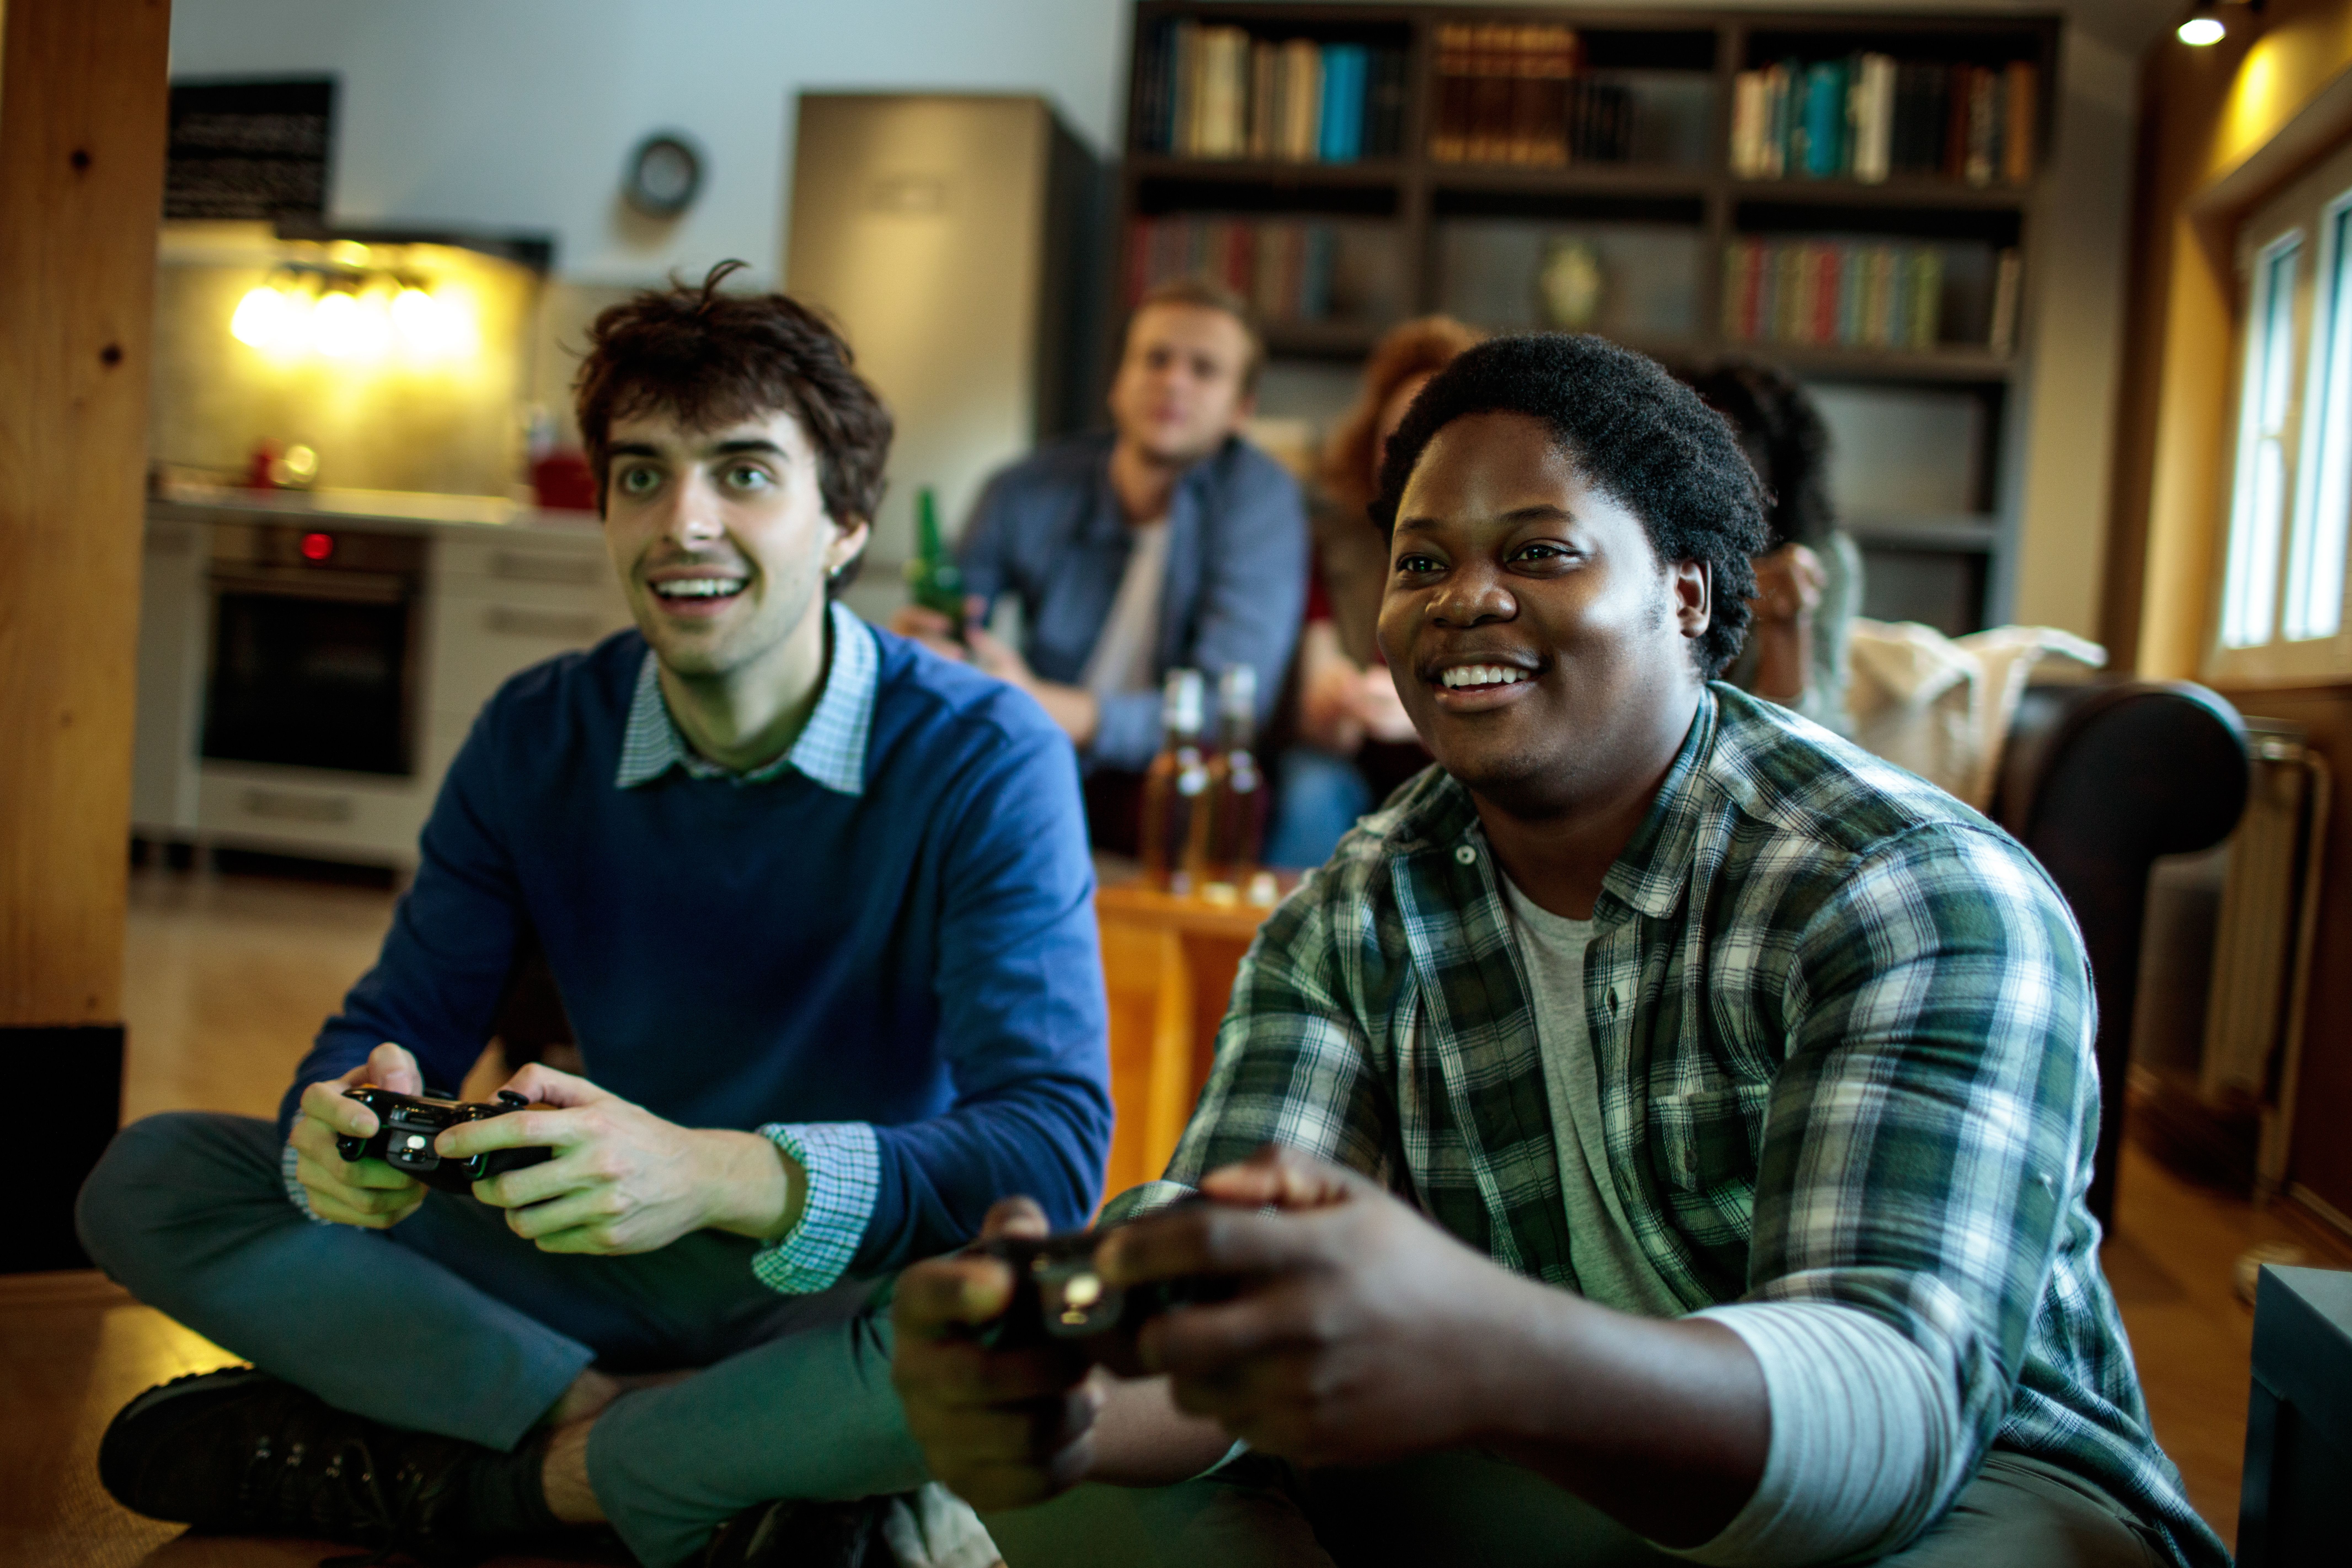 Young people playing local multiplayer video games in the living room on a gaming console.